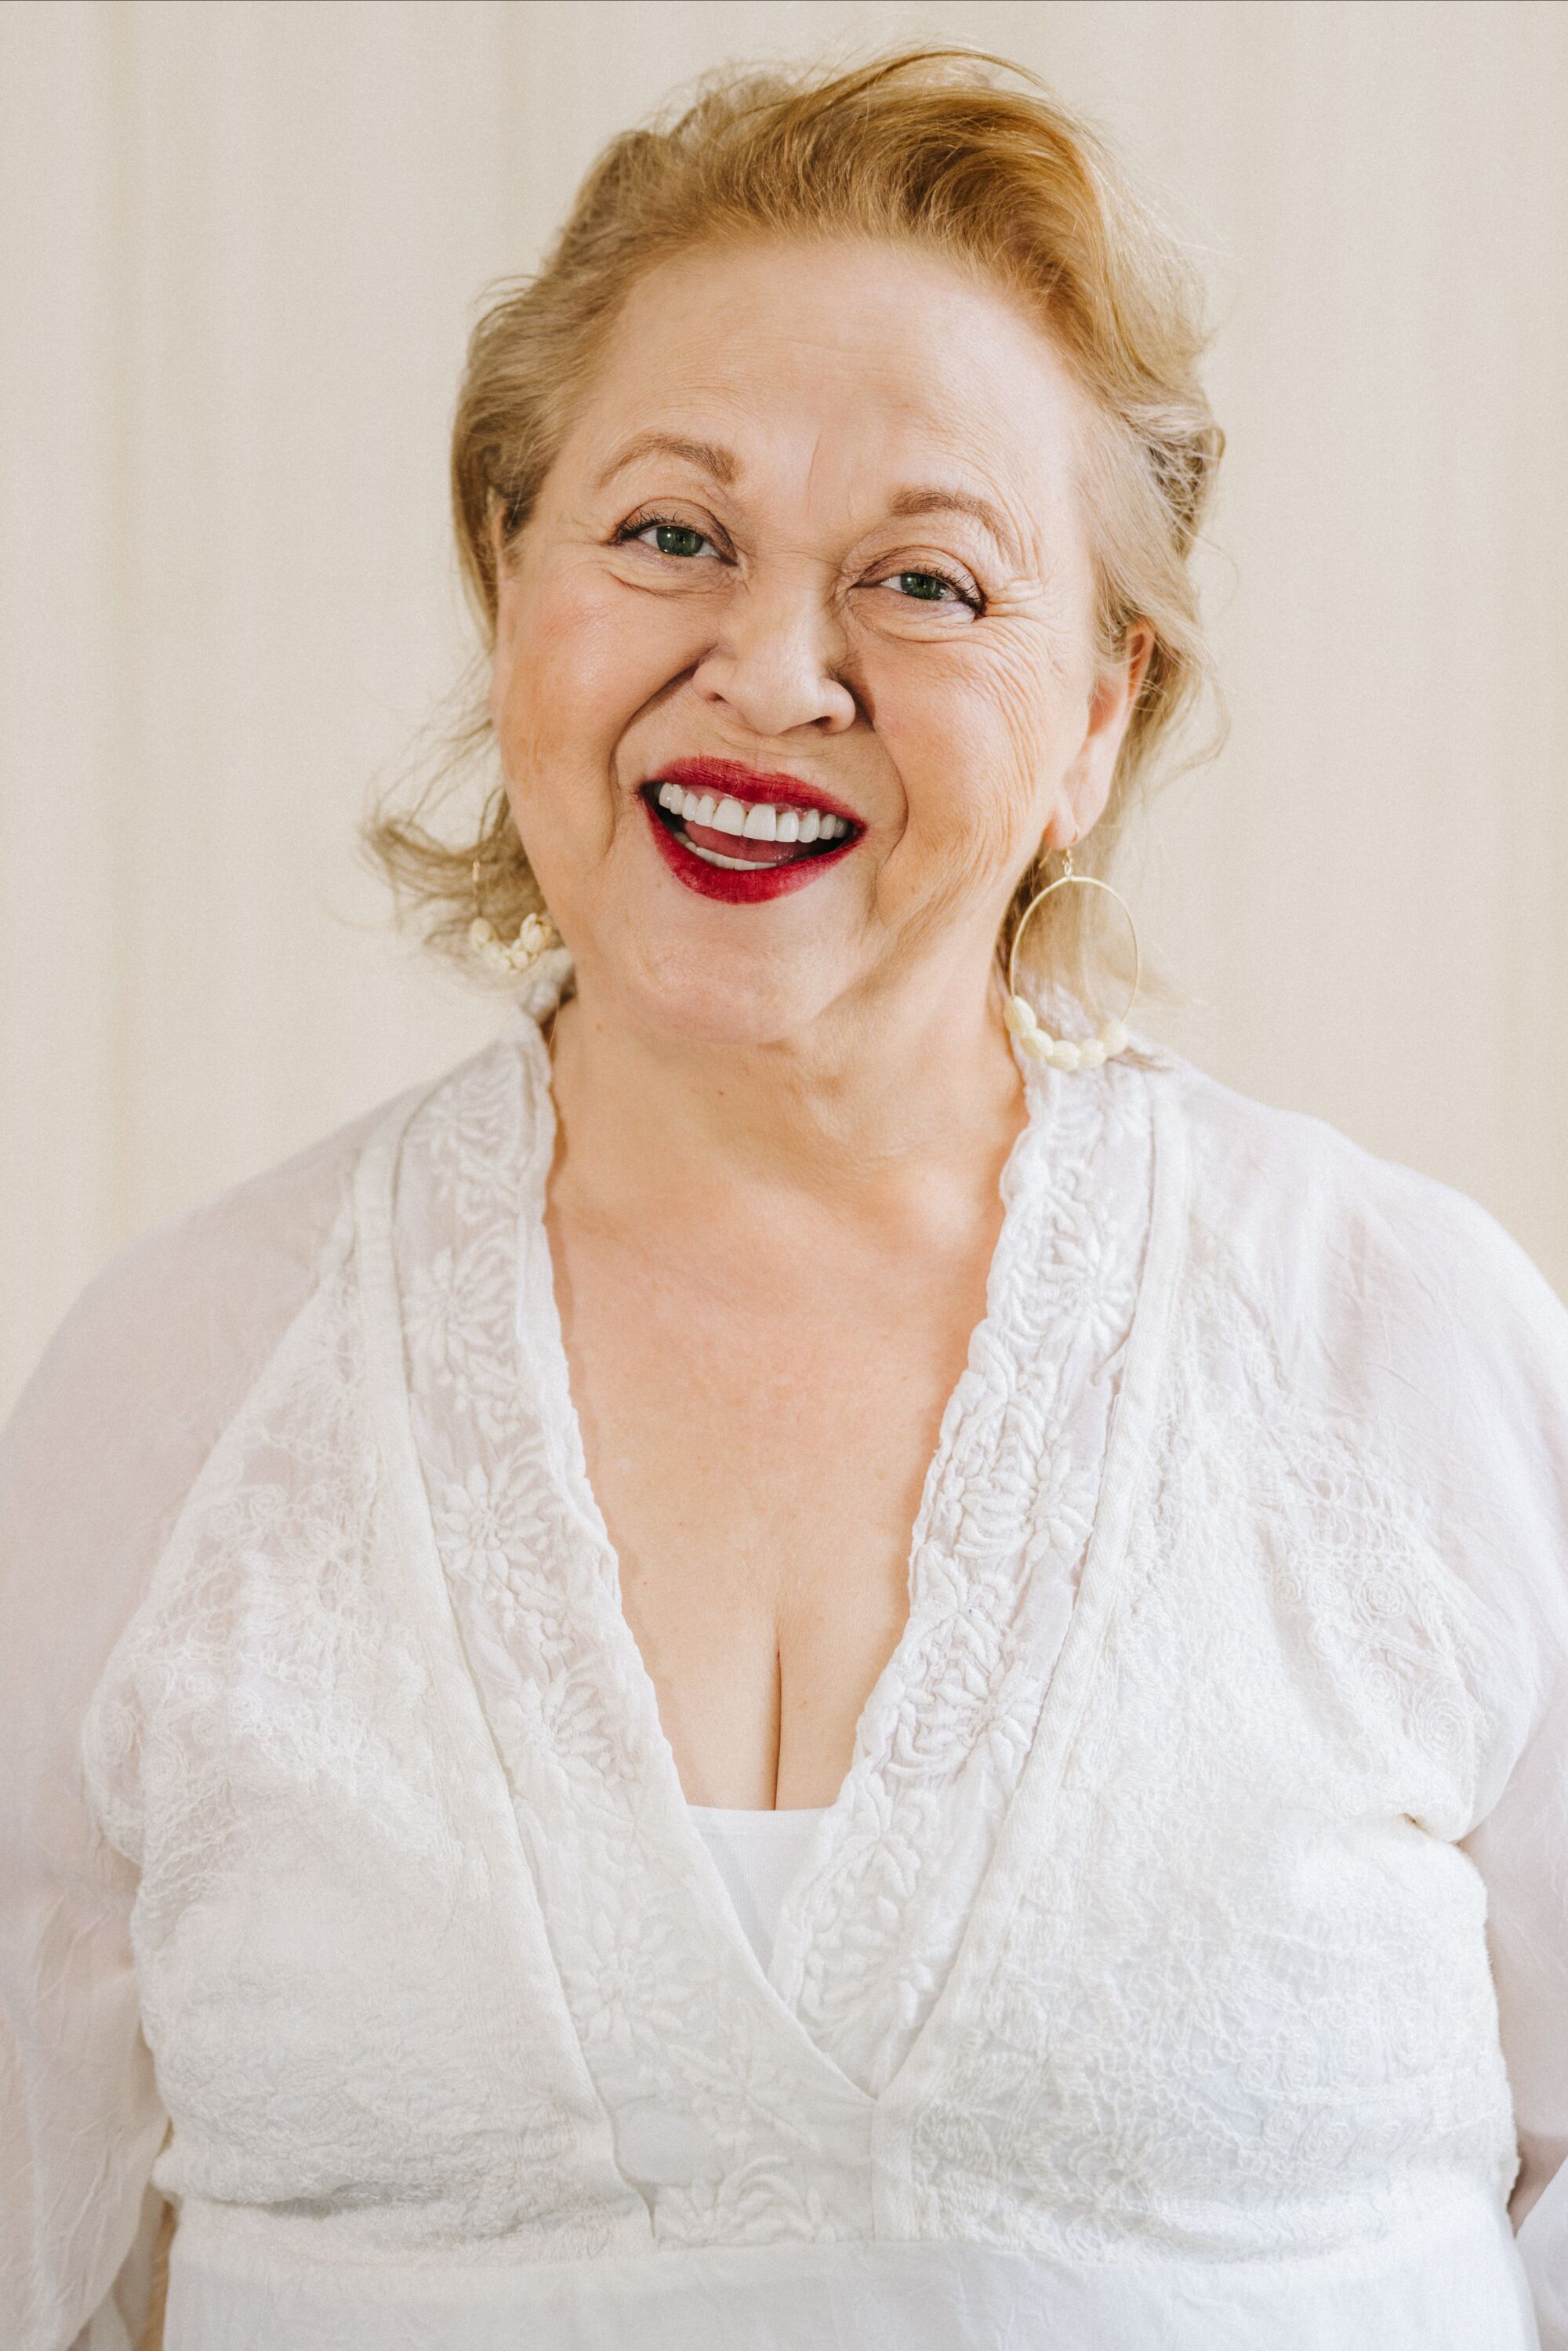 A woman smiles at the camera.